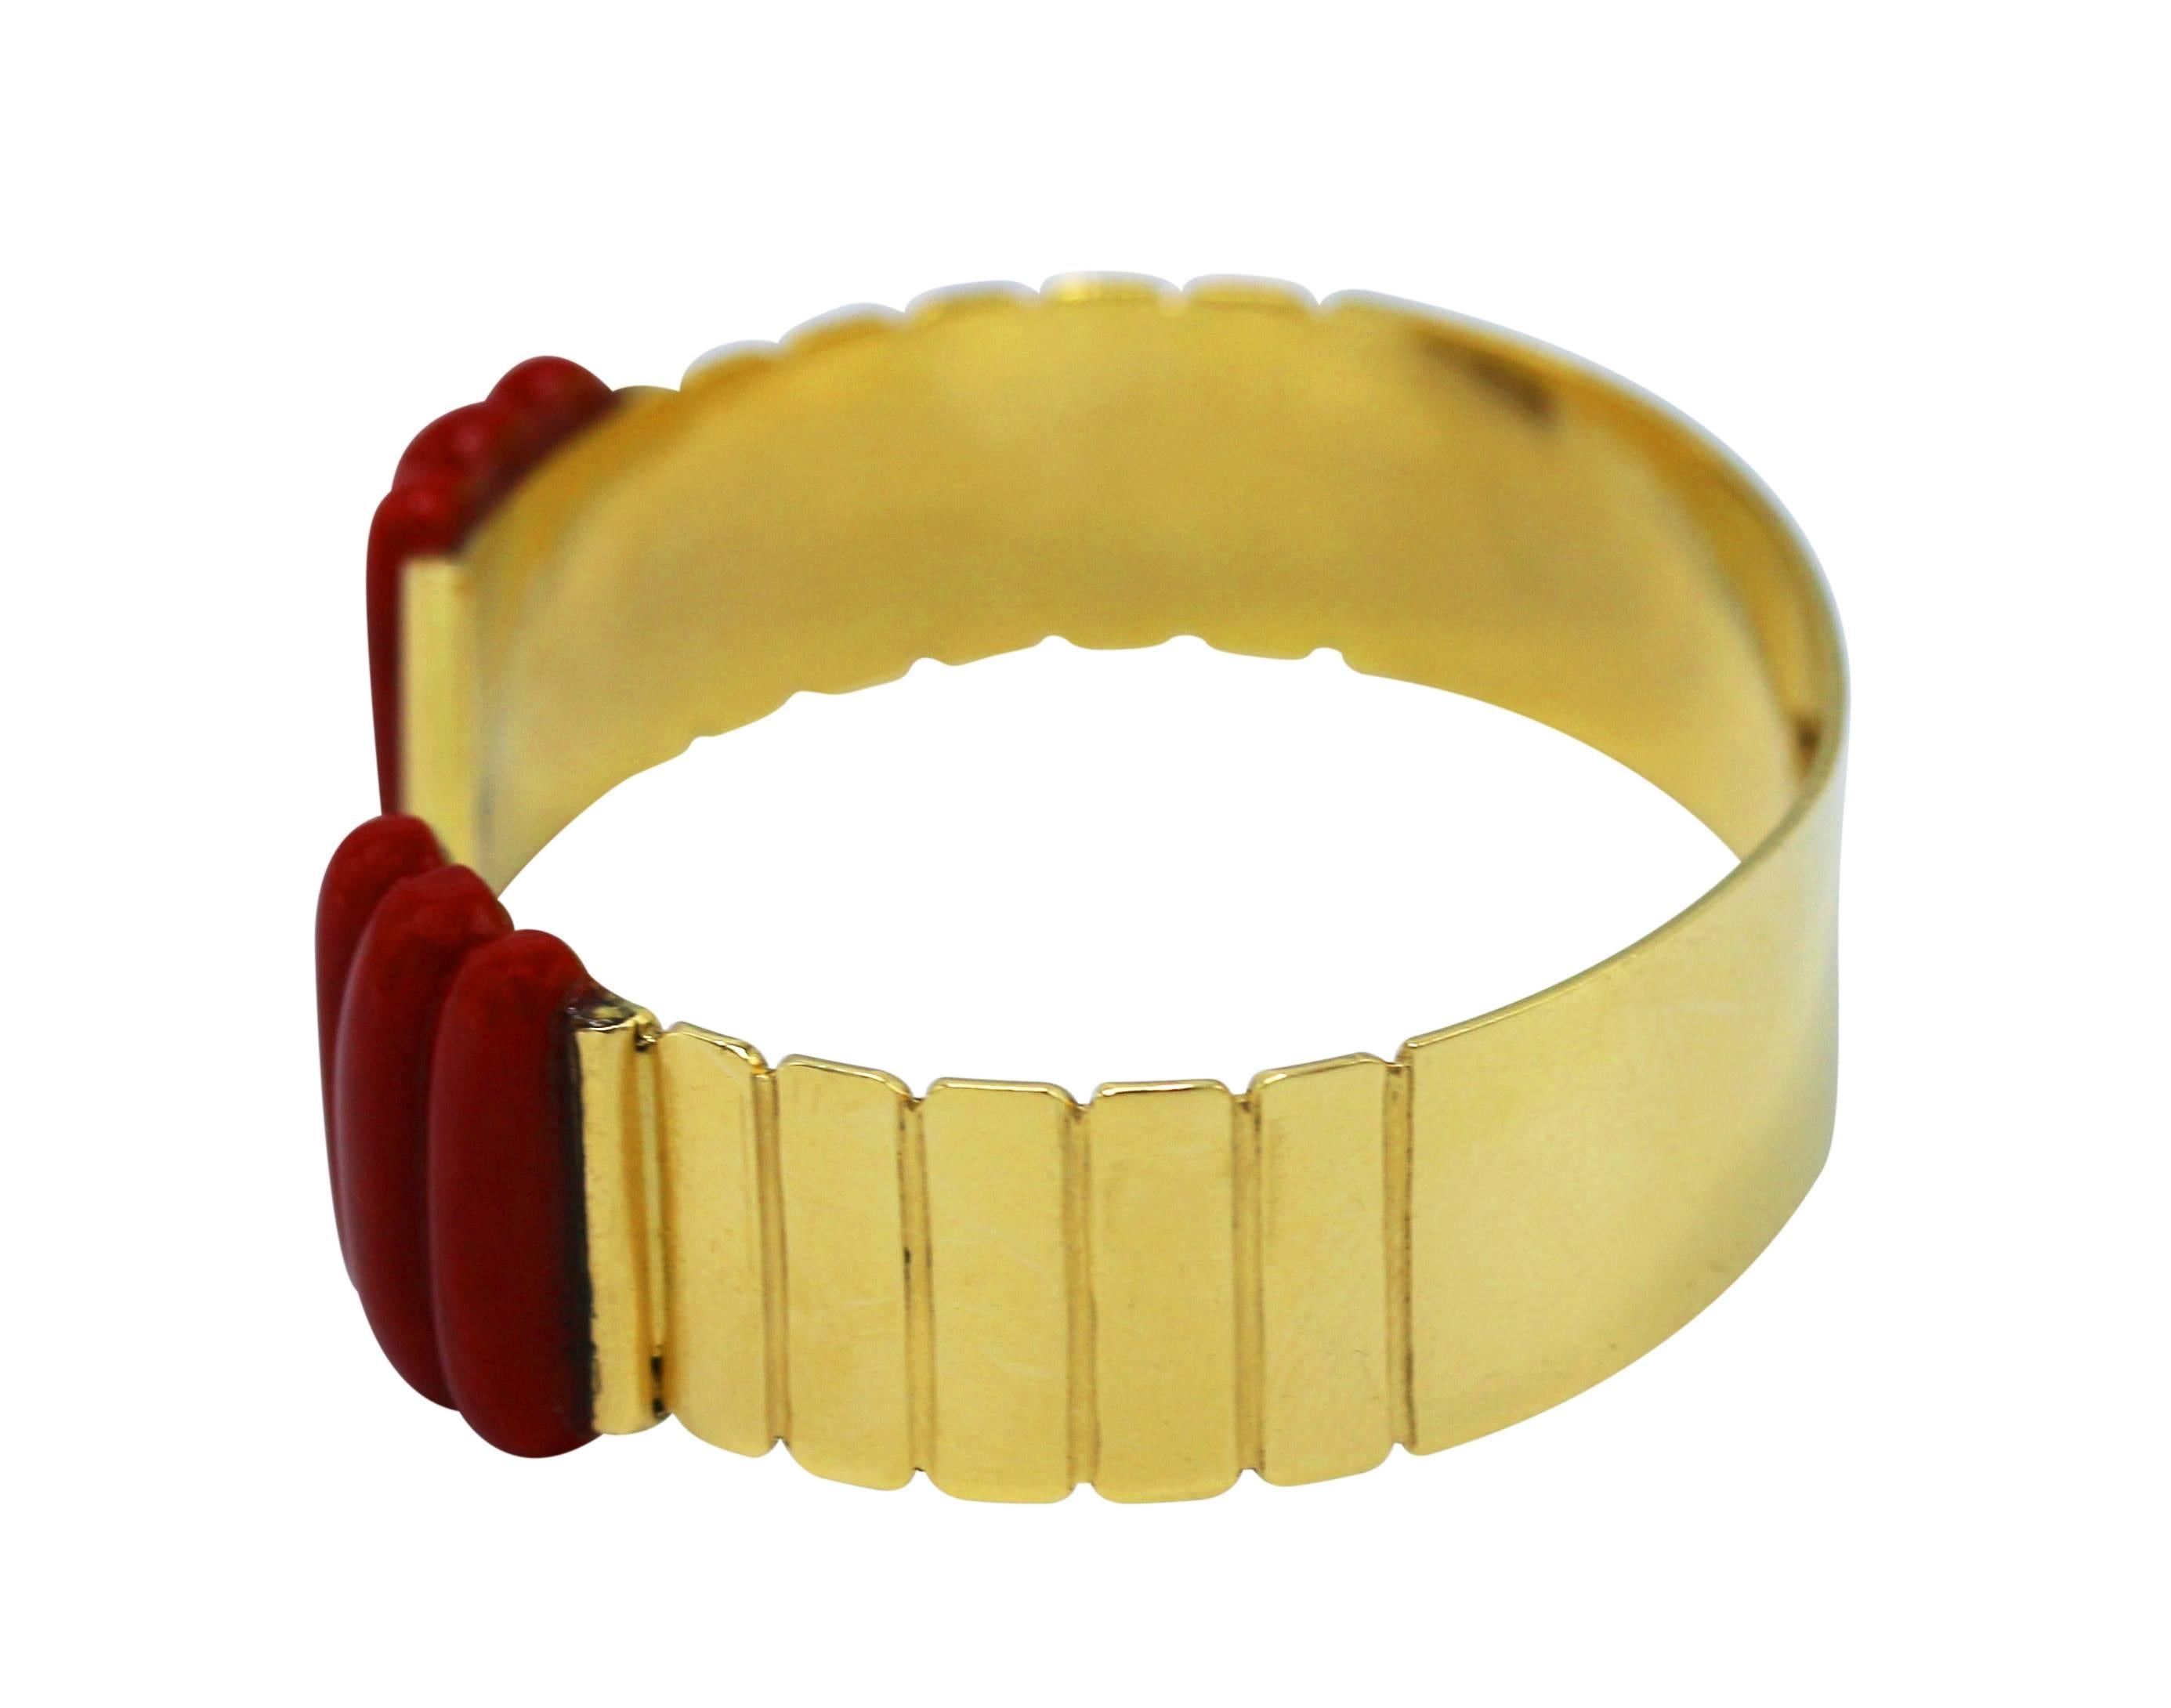 A chic bracelet composed of a polished 18 karat yellow gold cuff with ribbed details accented at the terminals with carved coral segments, length 6 inches, width 1/2 inch, gross weight 31.5 grams, signed Vitali Roma.